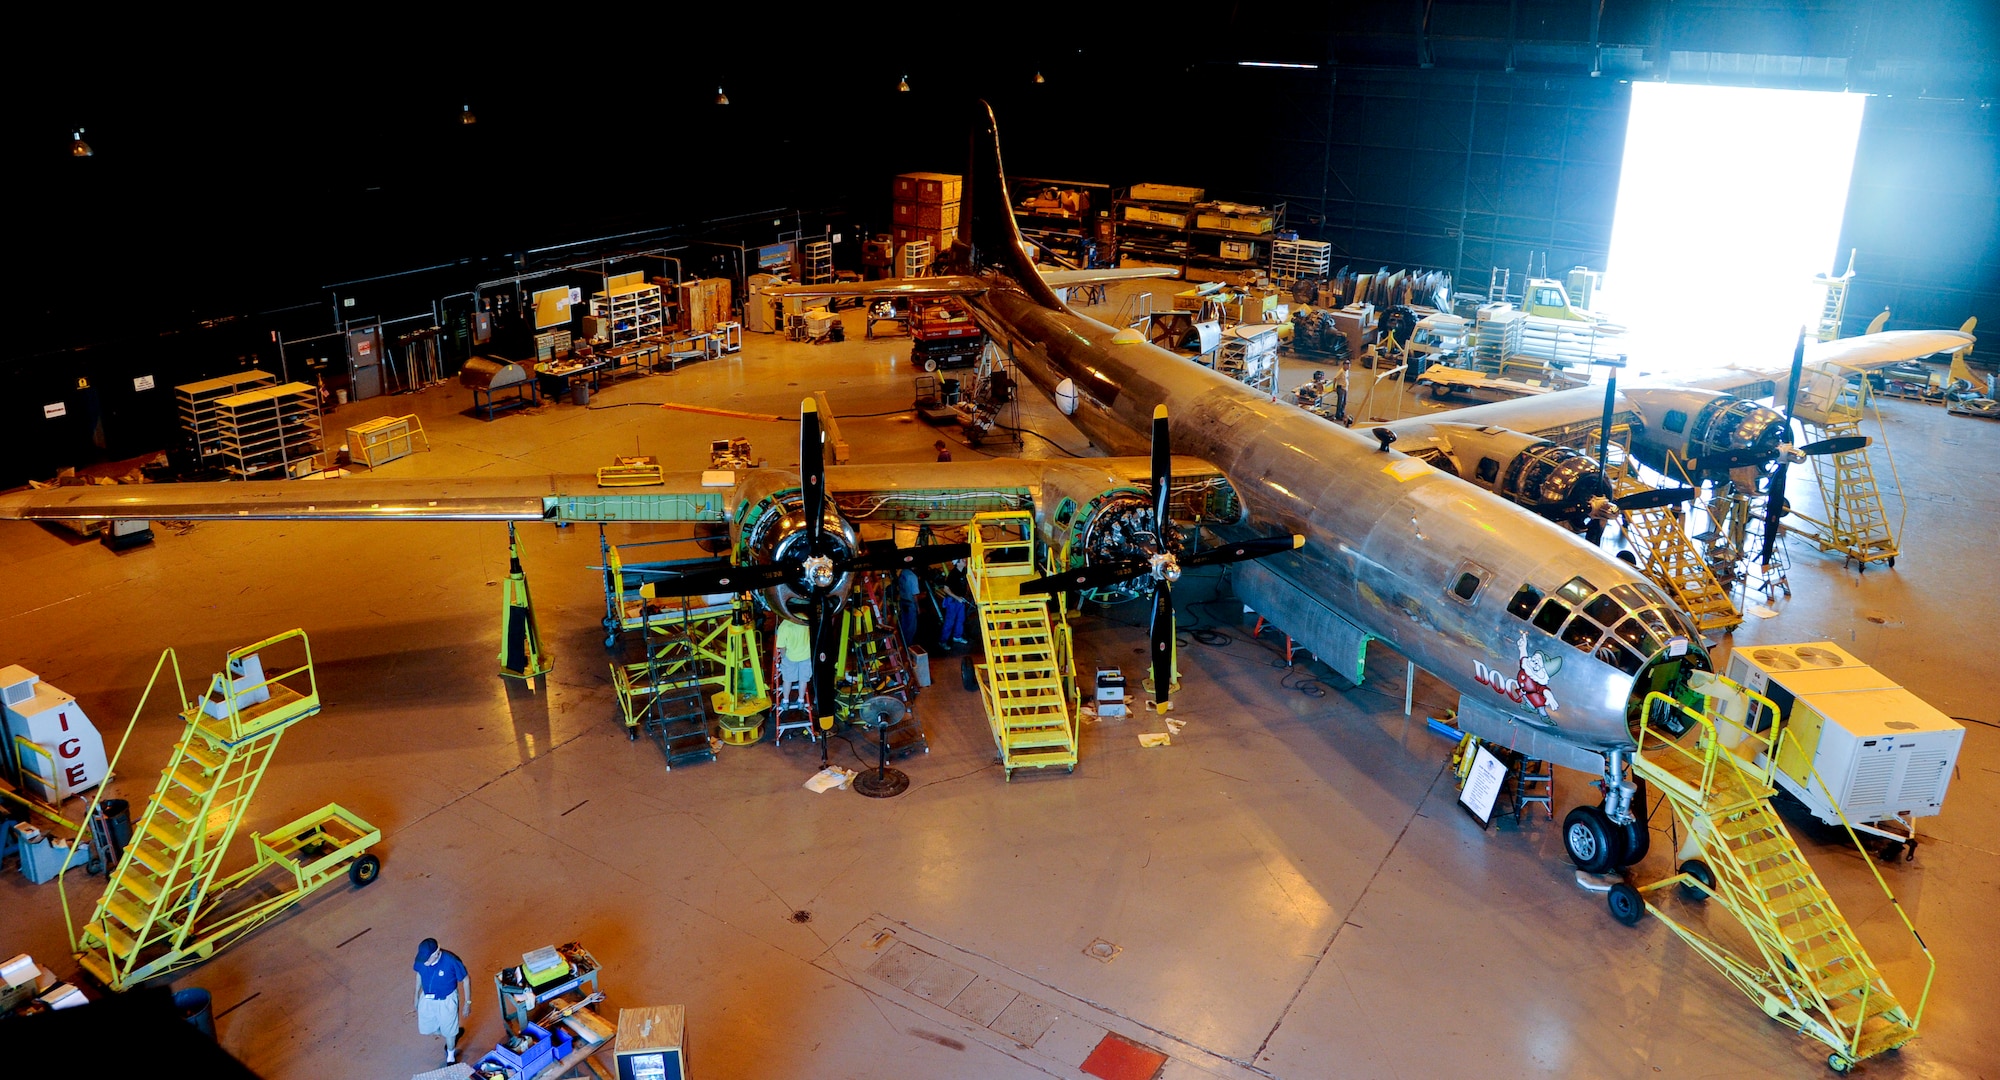 A Boeing B-29 Superfortress nicknamed ‘Doc,’ is being restored by volunteers July 22, 2014, in Wichita, Kansas. The aircraft was originally built in Wichita during World War II and was returned in 2000 to be restored. Project leadership expect to test-fly the aircraft later this year. (U.S. Air Force photo/Airman 1st Class John Linzmeier)